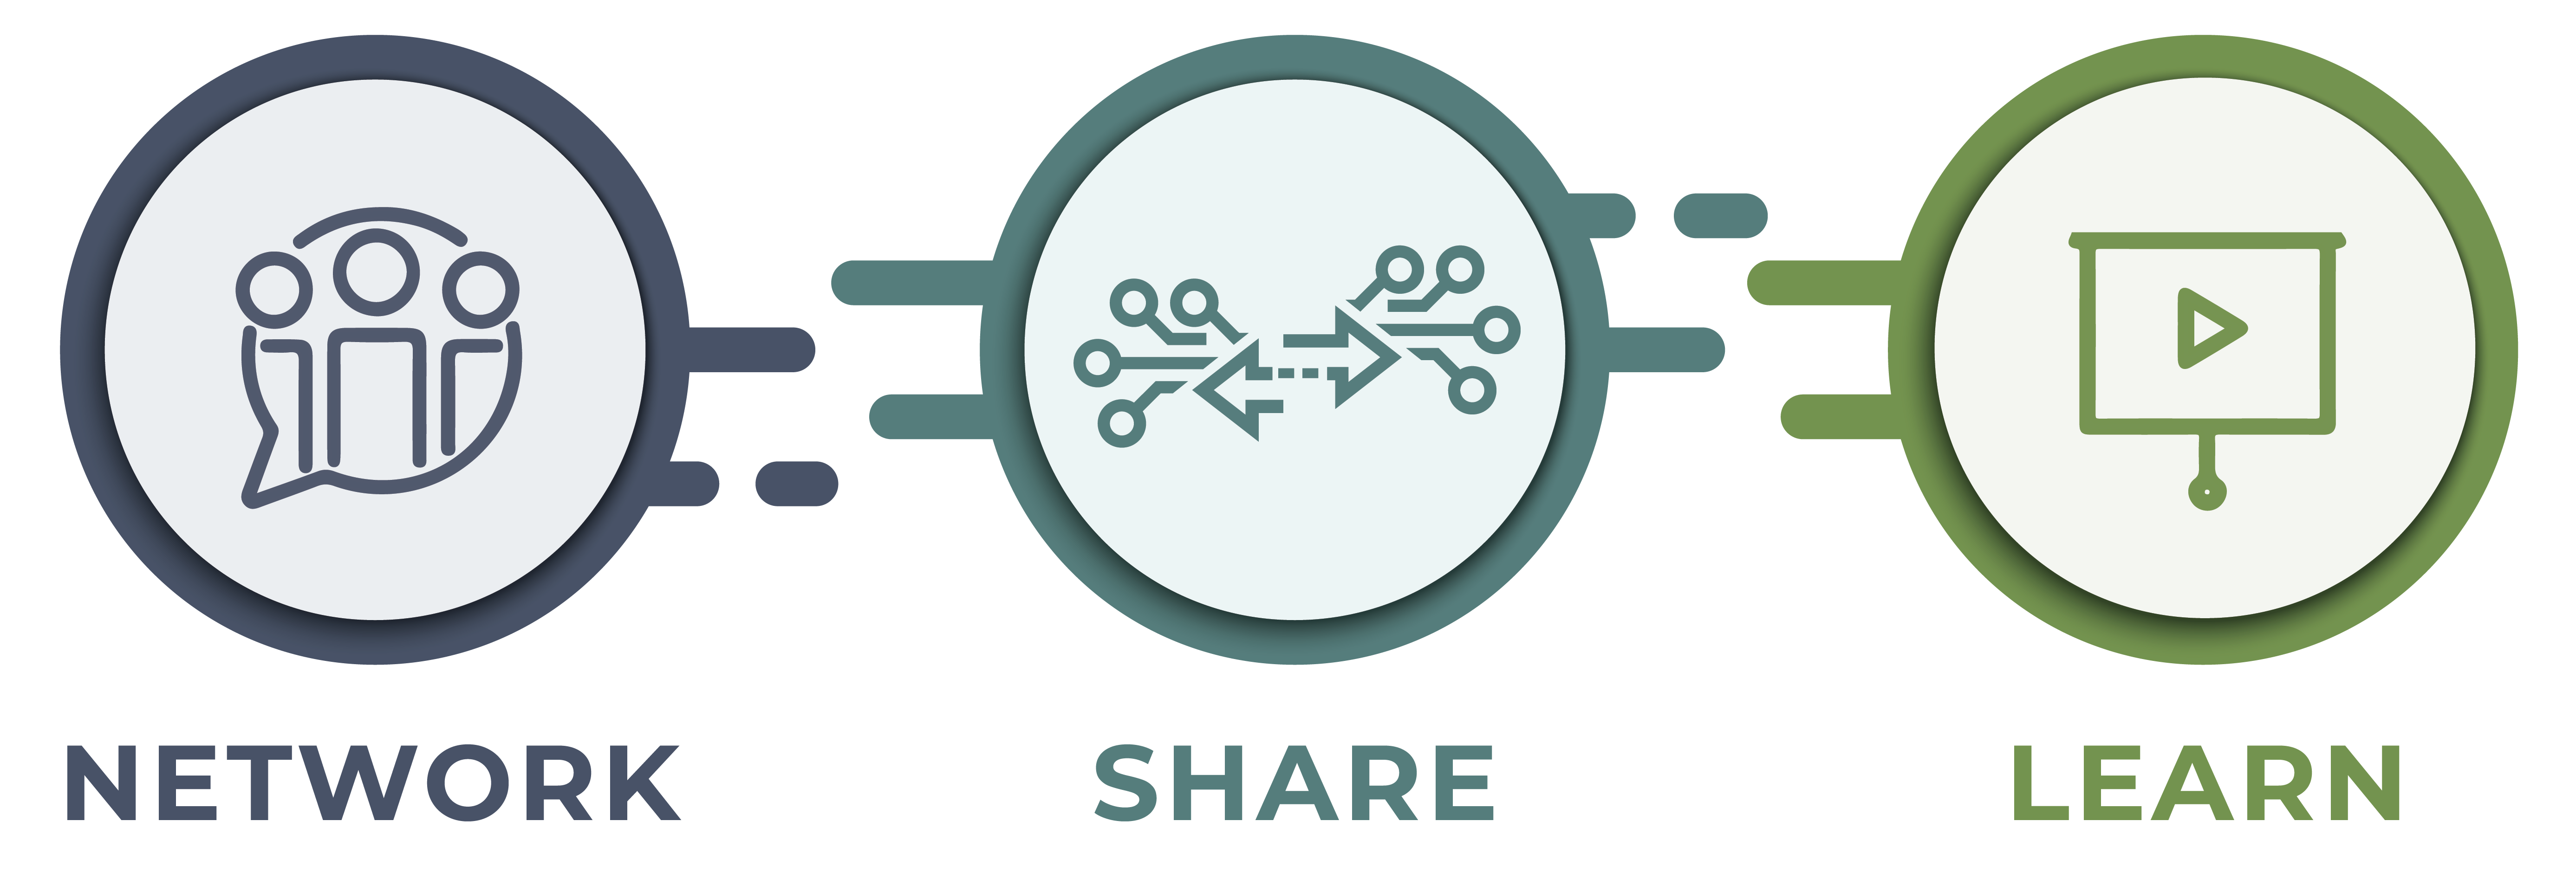 network-share-learn